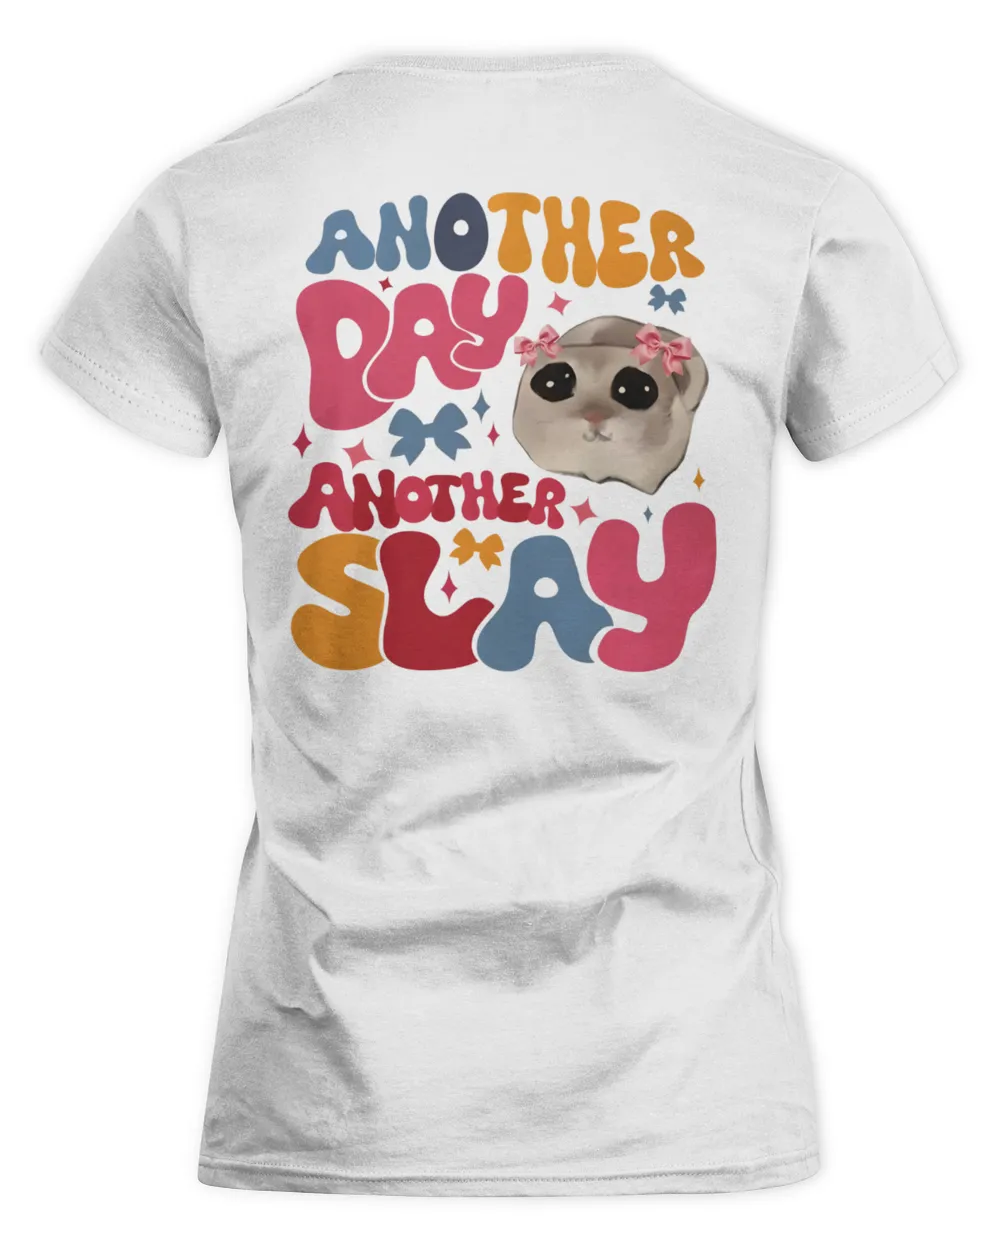 Another Day Another Slay 2 Sided Sweatshirt, Funny Sayings T-Shirt, Meme Tee, Tiny Hamster Shirt, Funny Trendy Hamster